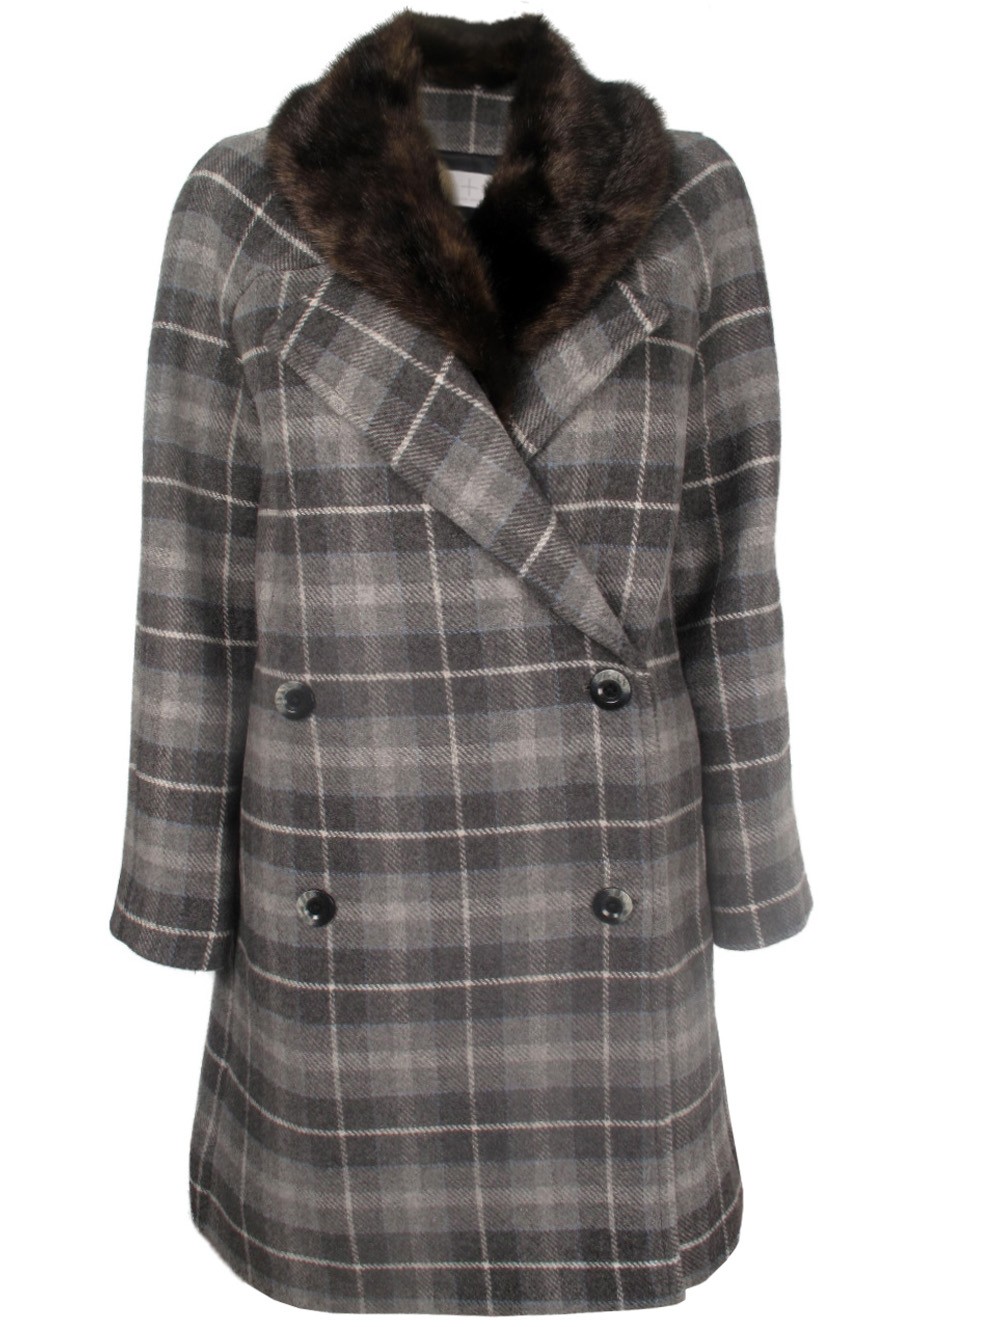 Thakoon Addition Double Breasted Plaid Coat in Gray (grey) | Lyst